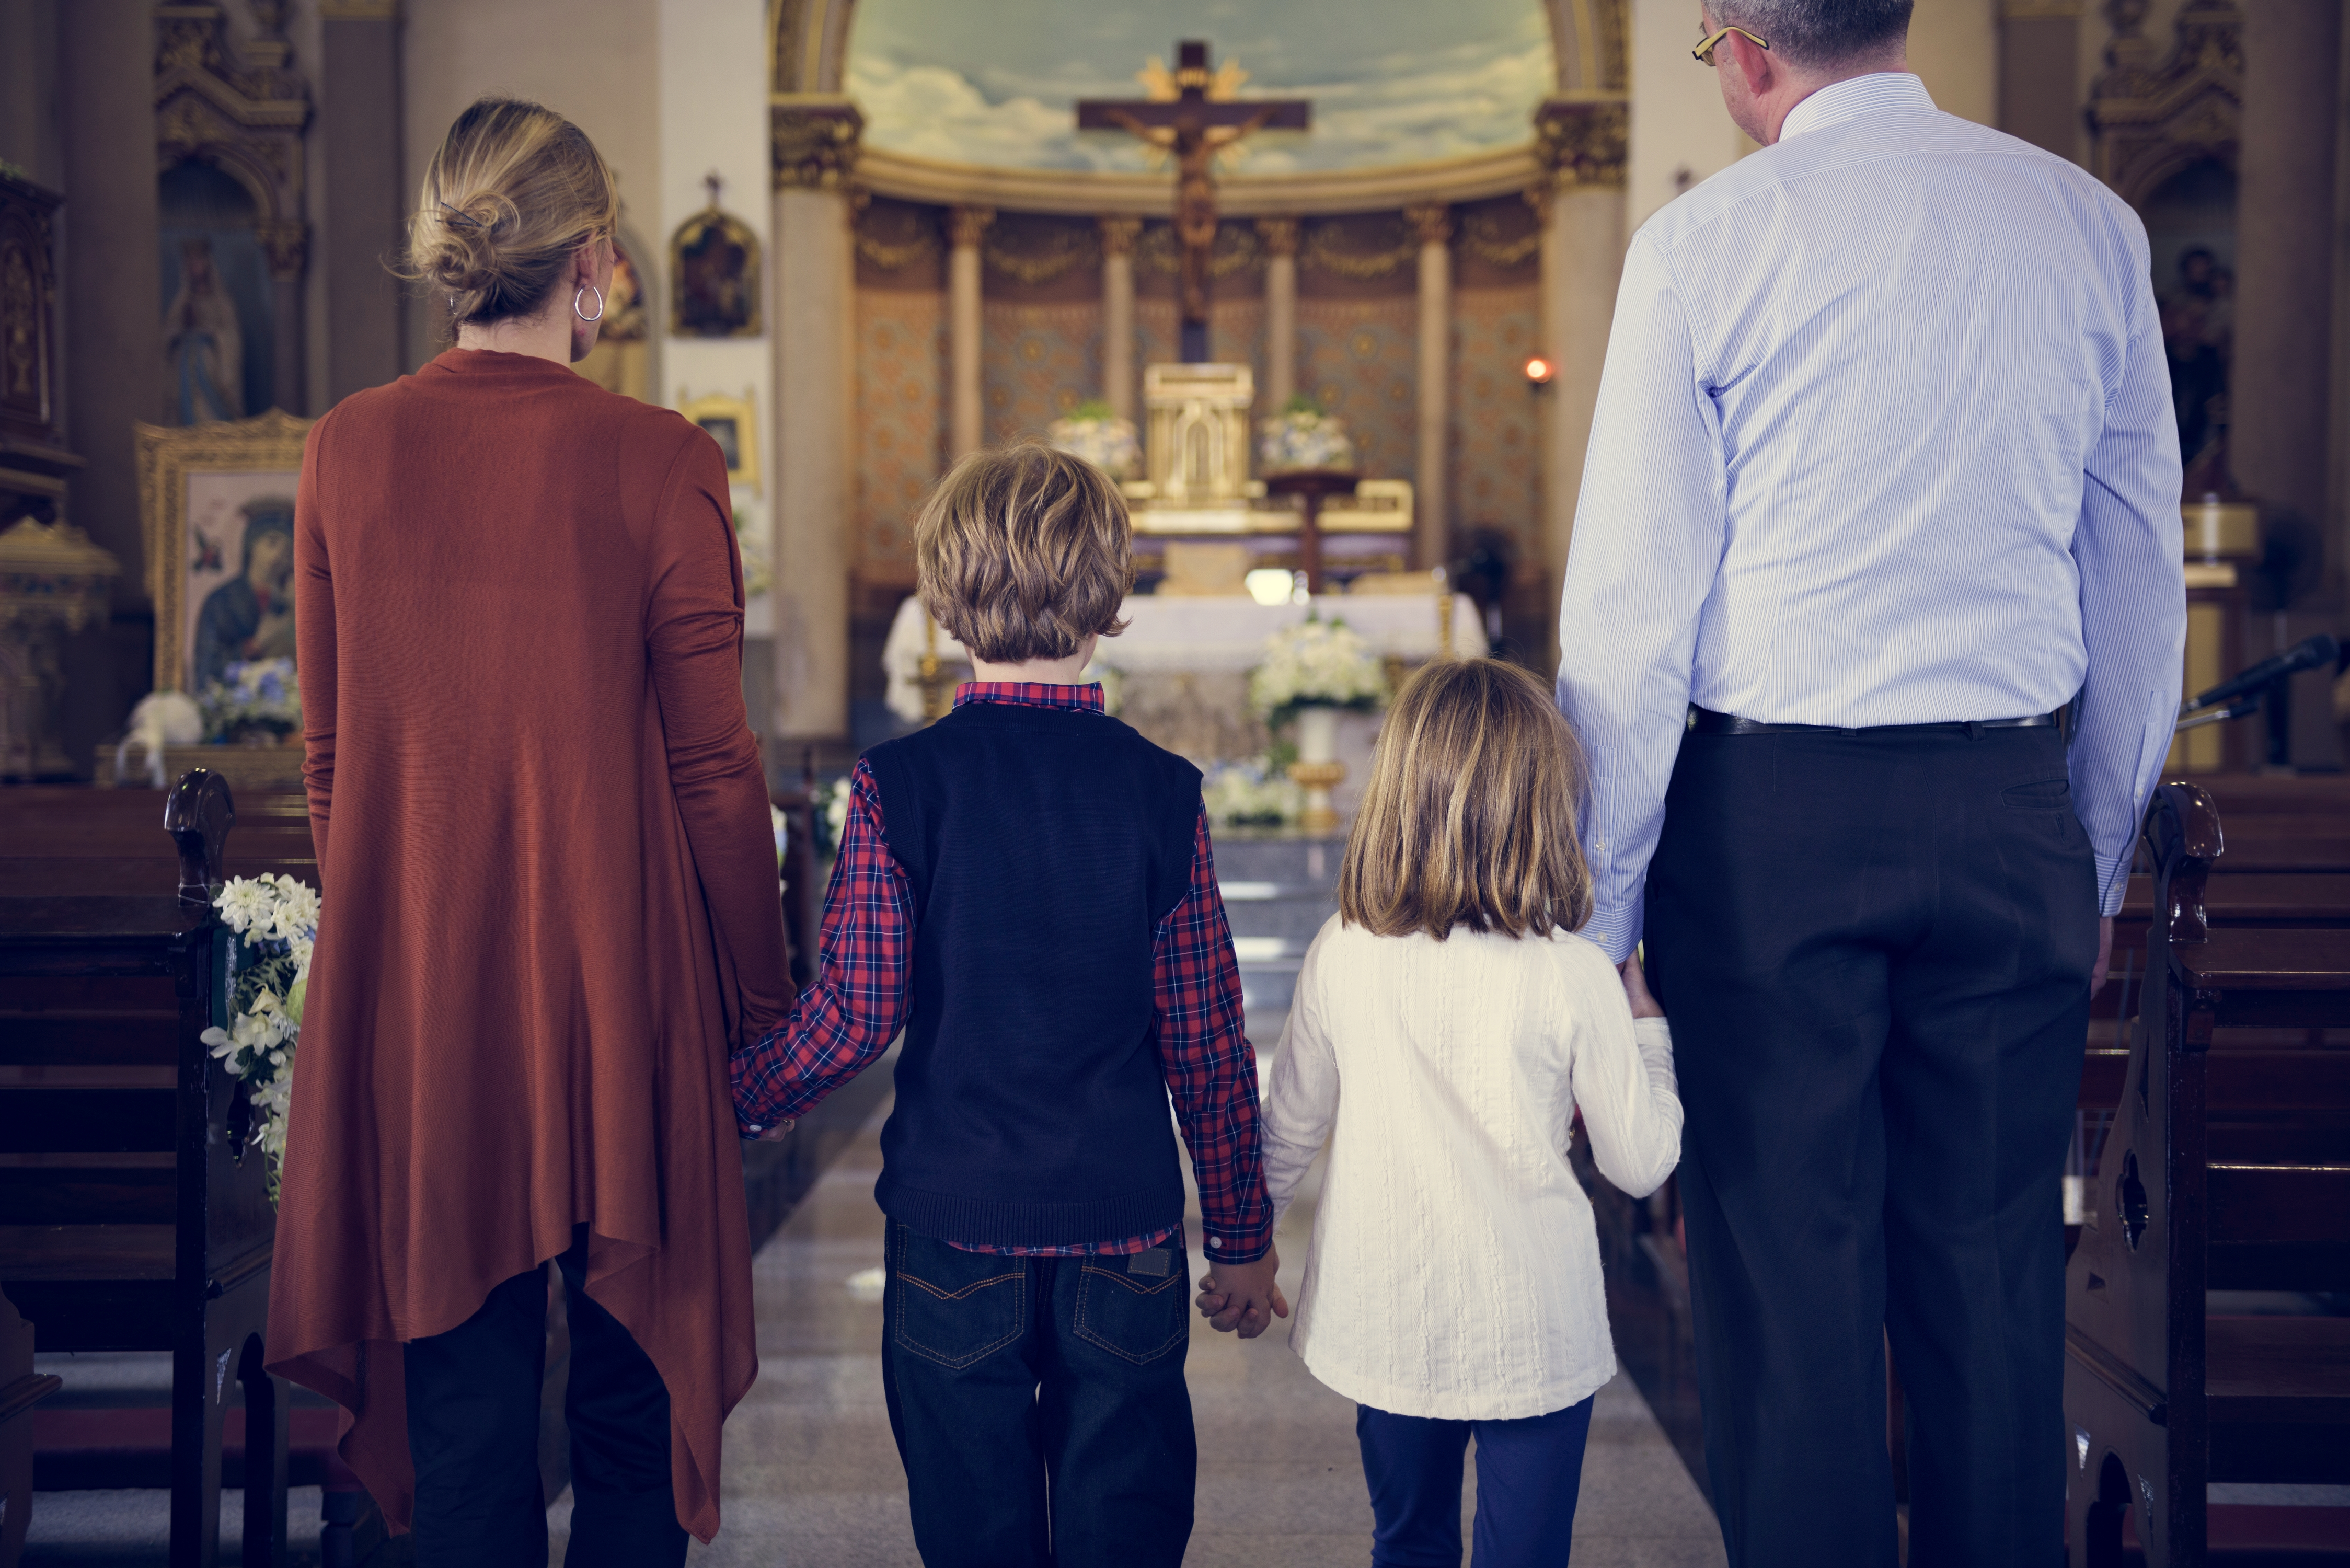 "How Can I Help My Children Stay Catholic?" (The Inner Life with Patrick Conley)